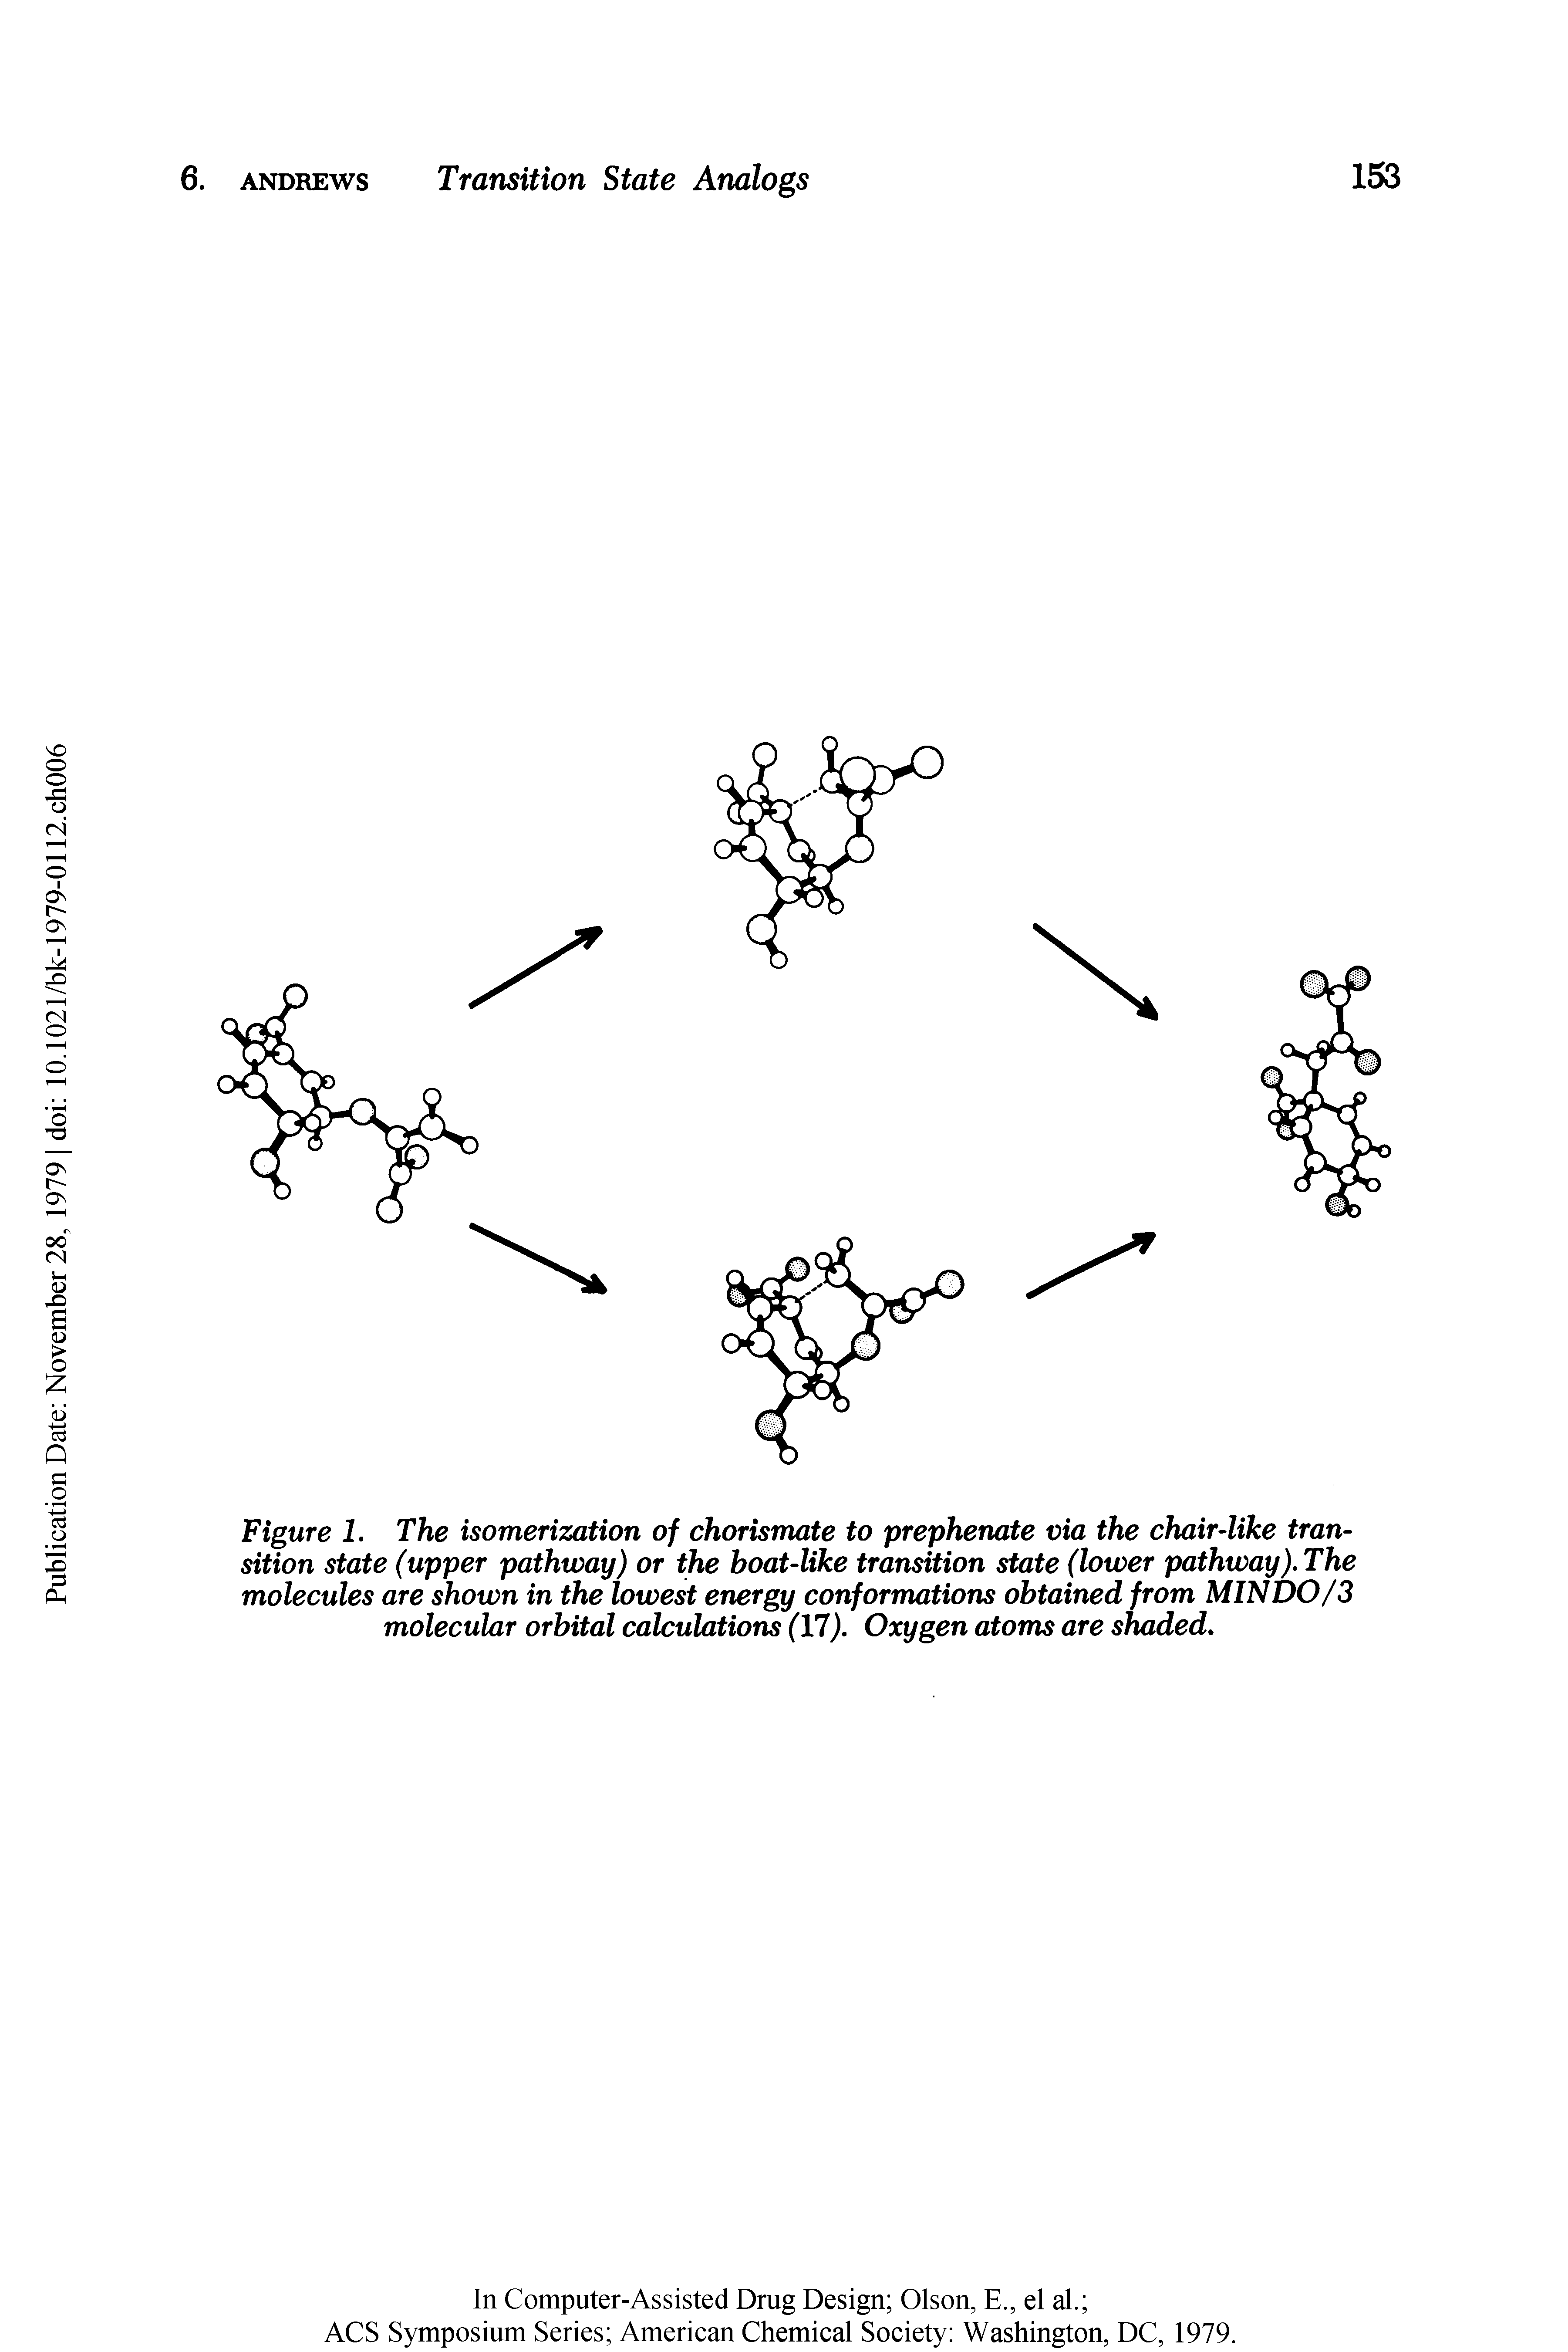 Figure 1. The isomerization of chorismate to prephenate via the chair-like transition state (upper pathway) or the boat-like transition state (lower pathway). The molecules are shown in the lowest energy conformations obtained from MIN DO/3 molecular orbital calculations (17). Oxygen atoms are shaded.